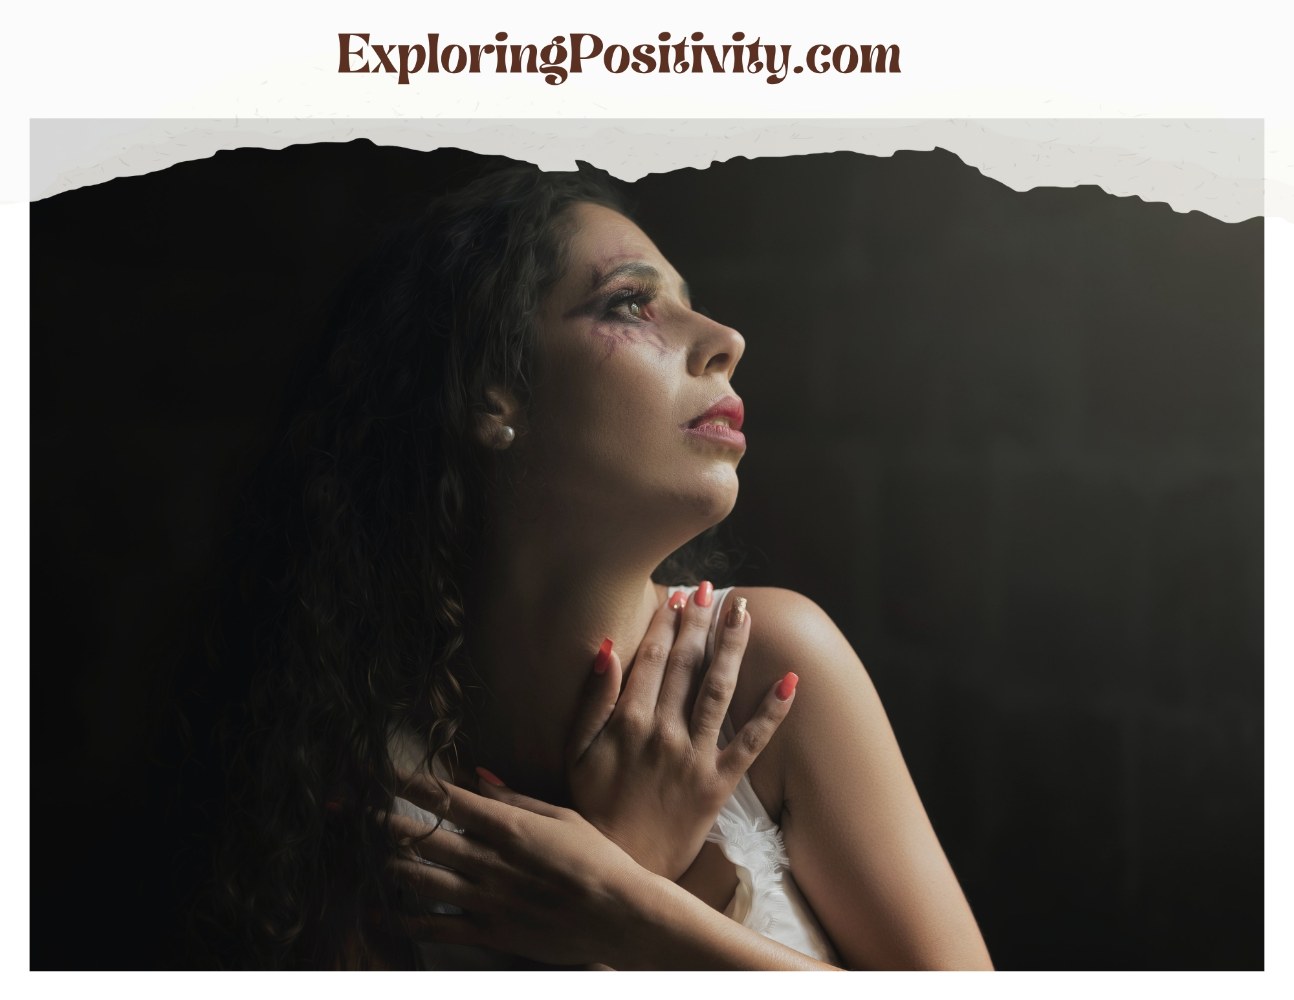 Trust and Intimacy Issues Healing Relationship Wounds